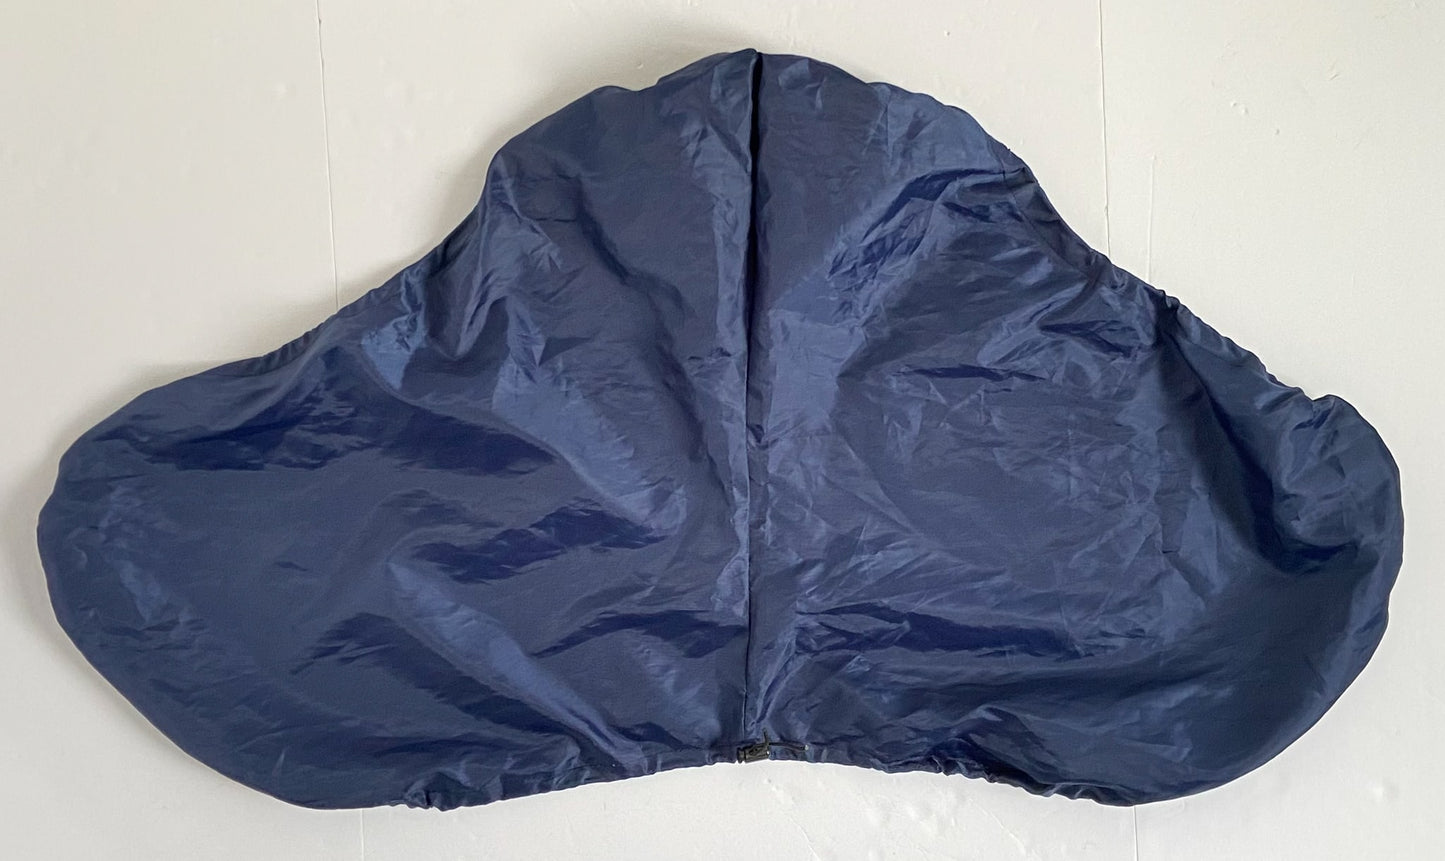 Supra English Saddle Cover with Drawstring - Navy - One Size